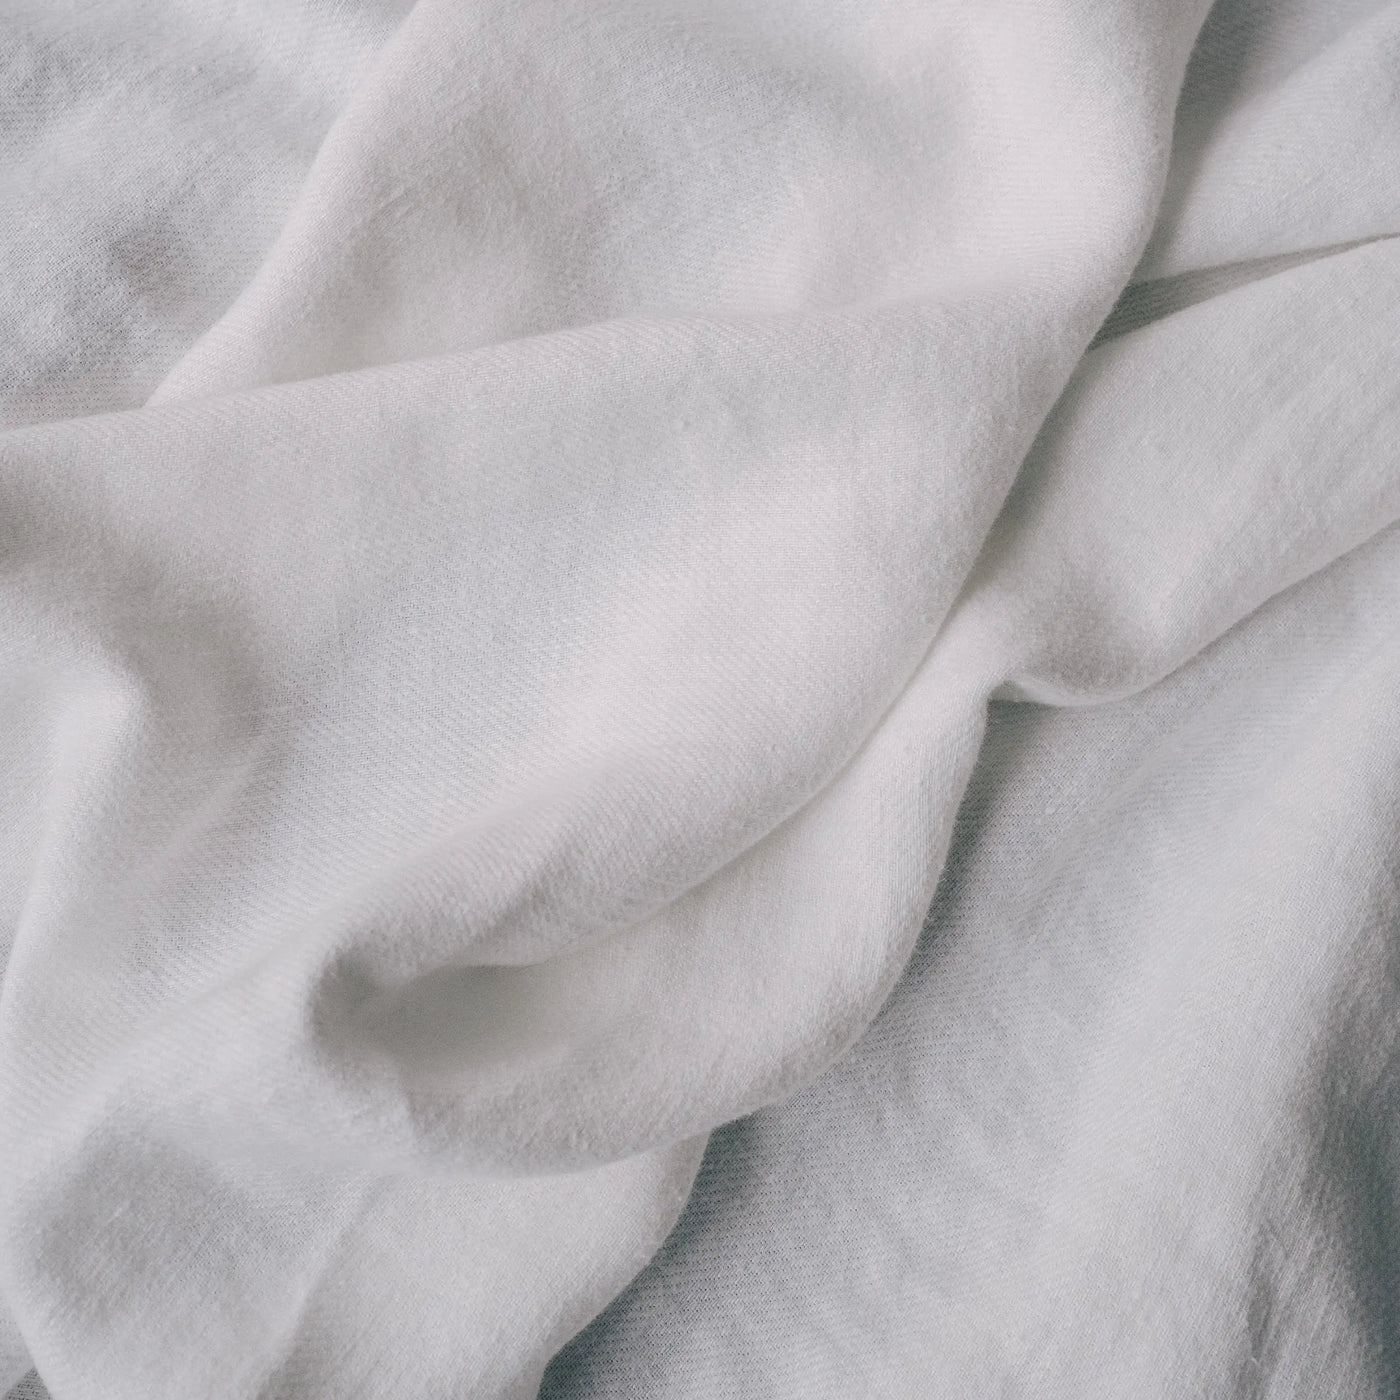 Buy now Premium Linen Blanket White at Tintory Store 1